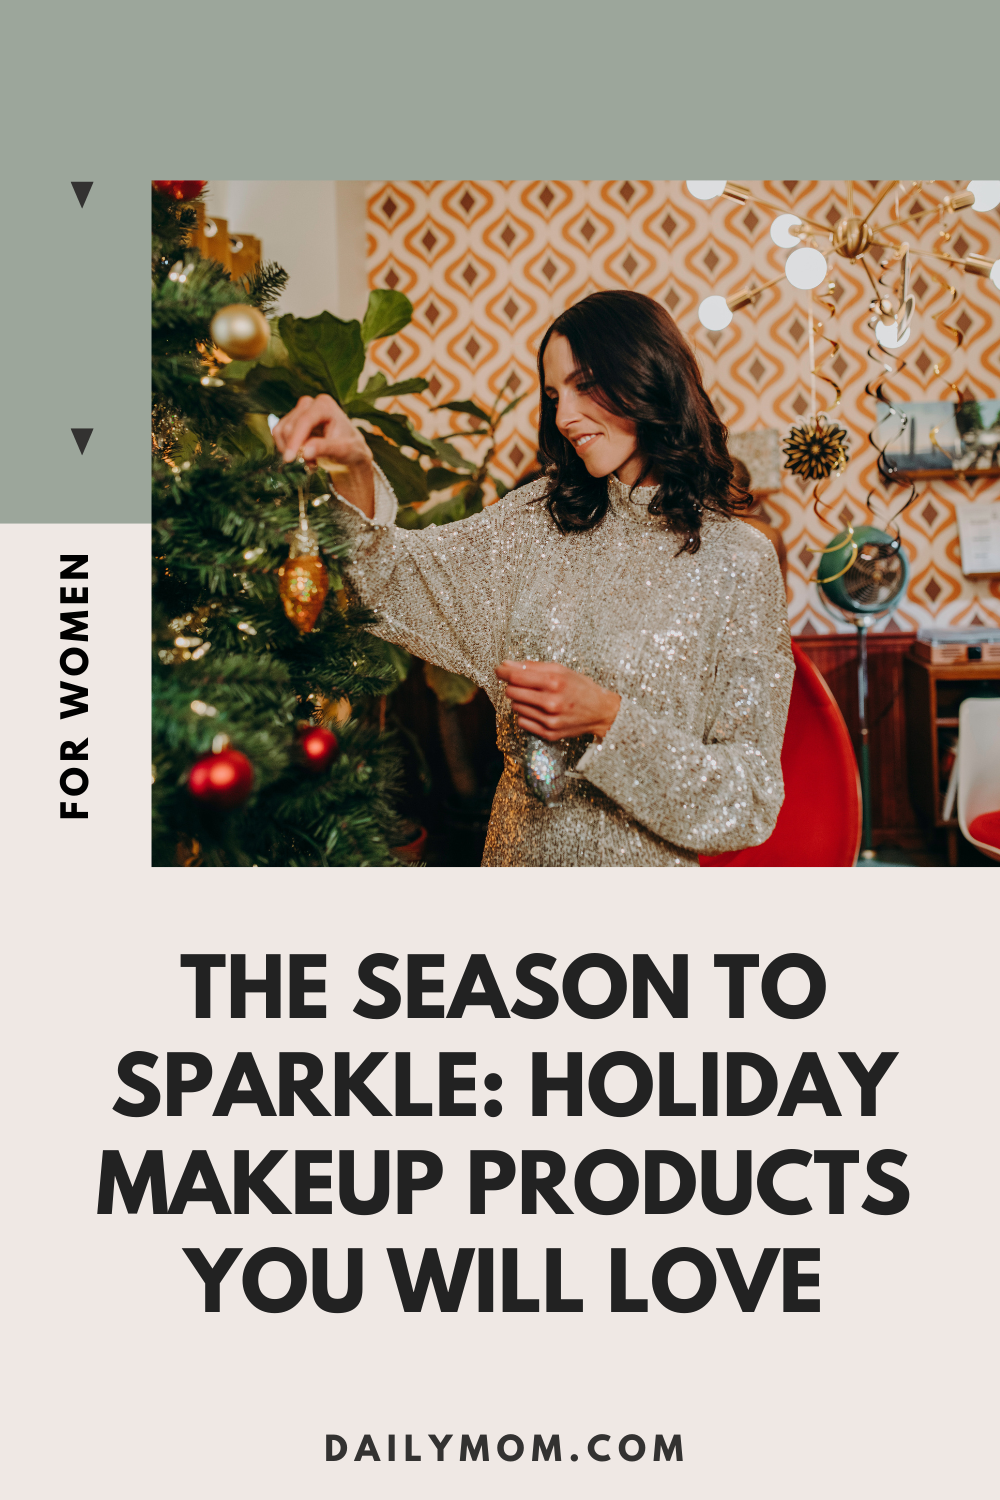 The Season To Sparkle: Holiday Makeup Products You Will Love